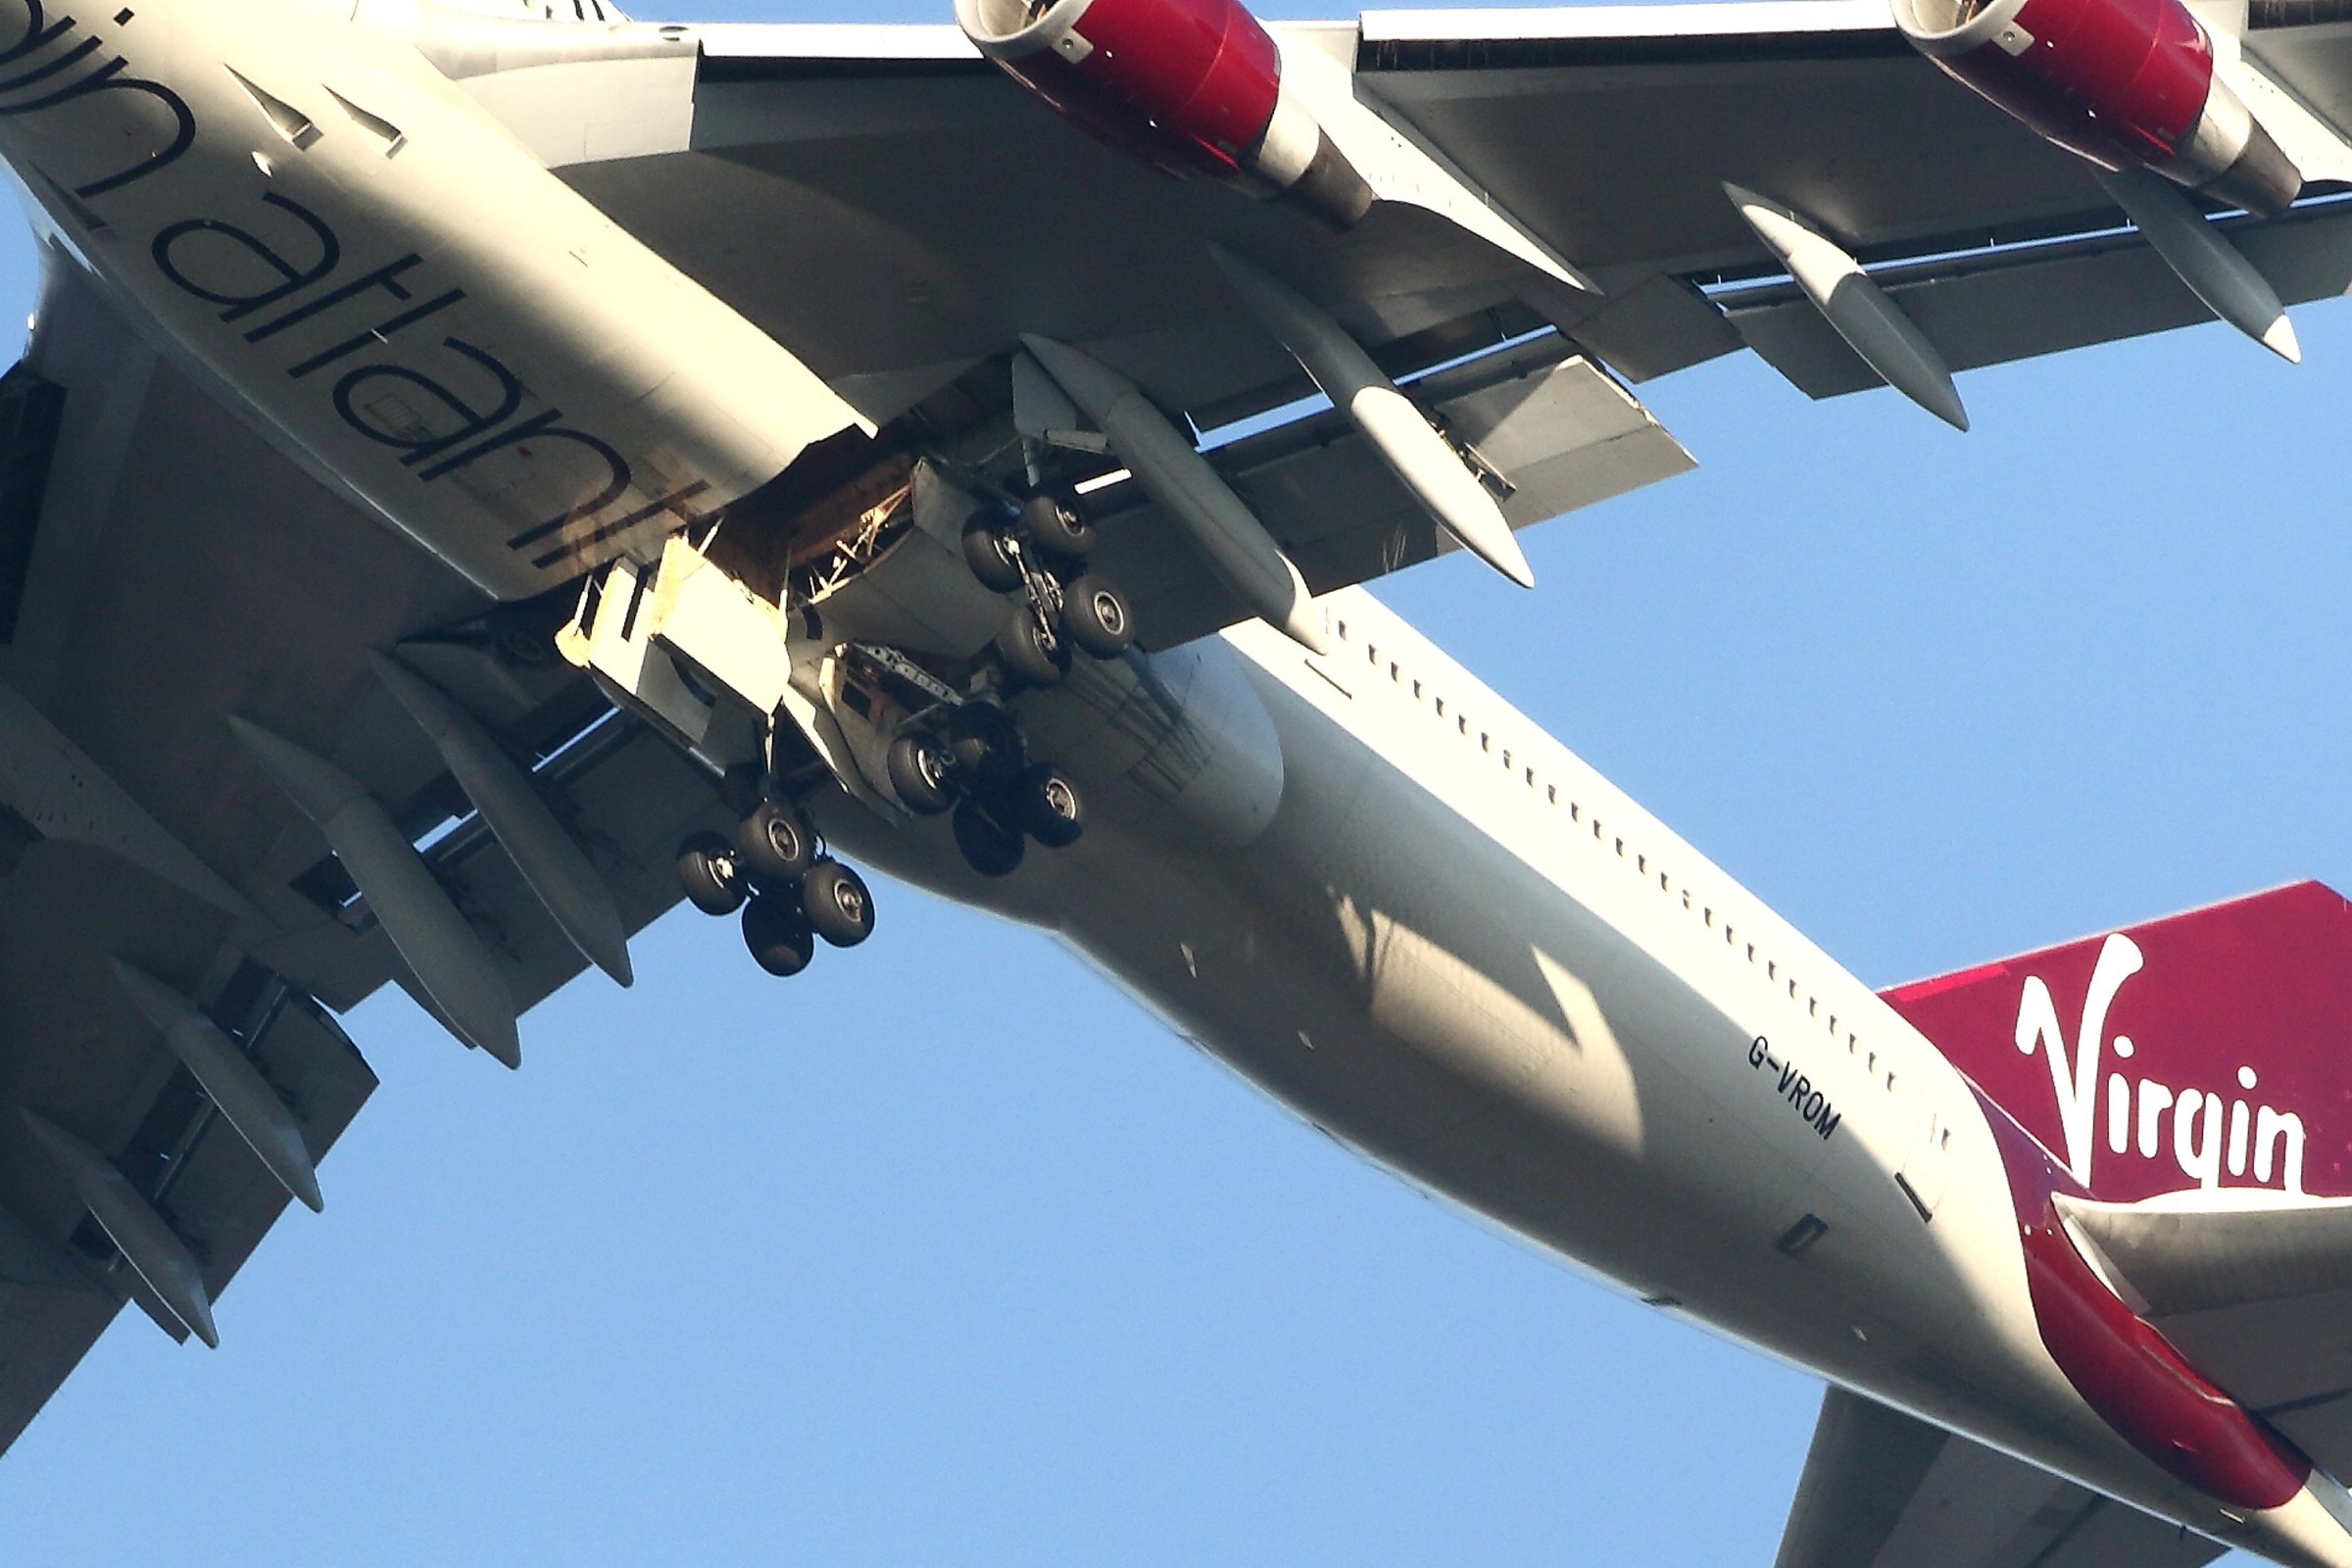 A detailed view of the undercarriage of the Virgin Atlantic Boeing 747 as it passes overhead at Gatwick airport in West Sussex on December 29, 2014 in London, England.